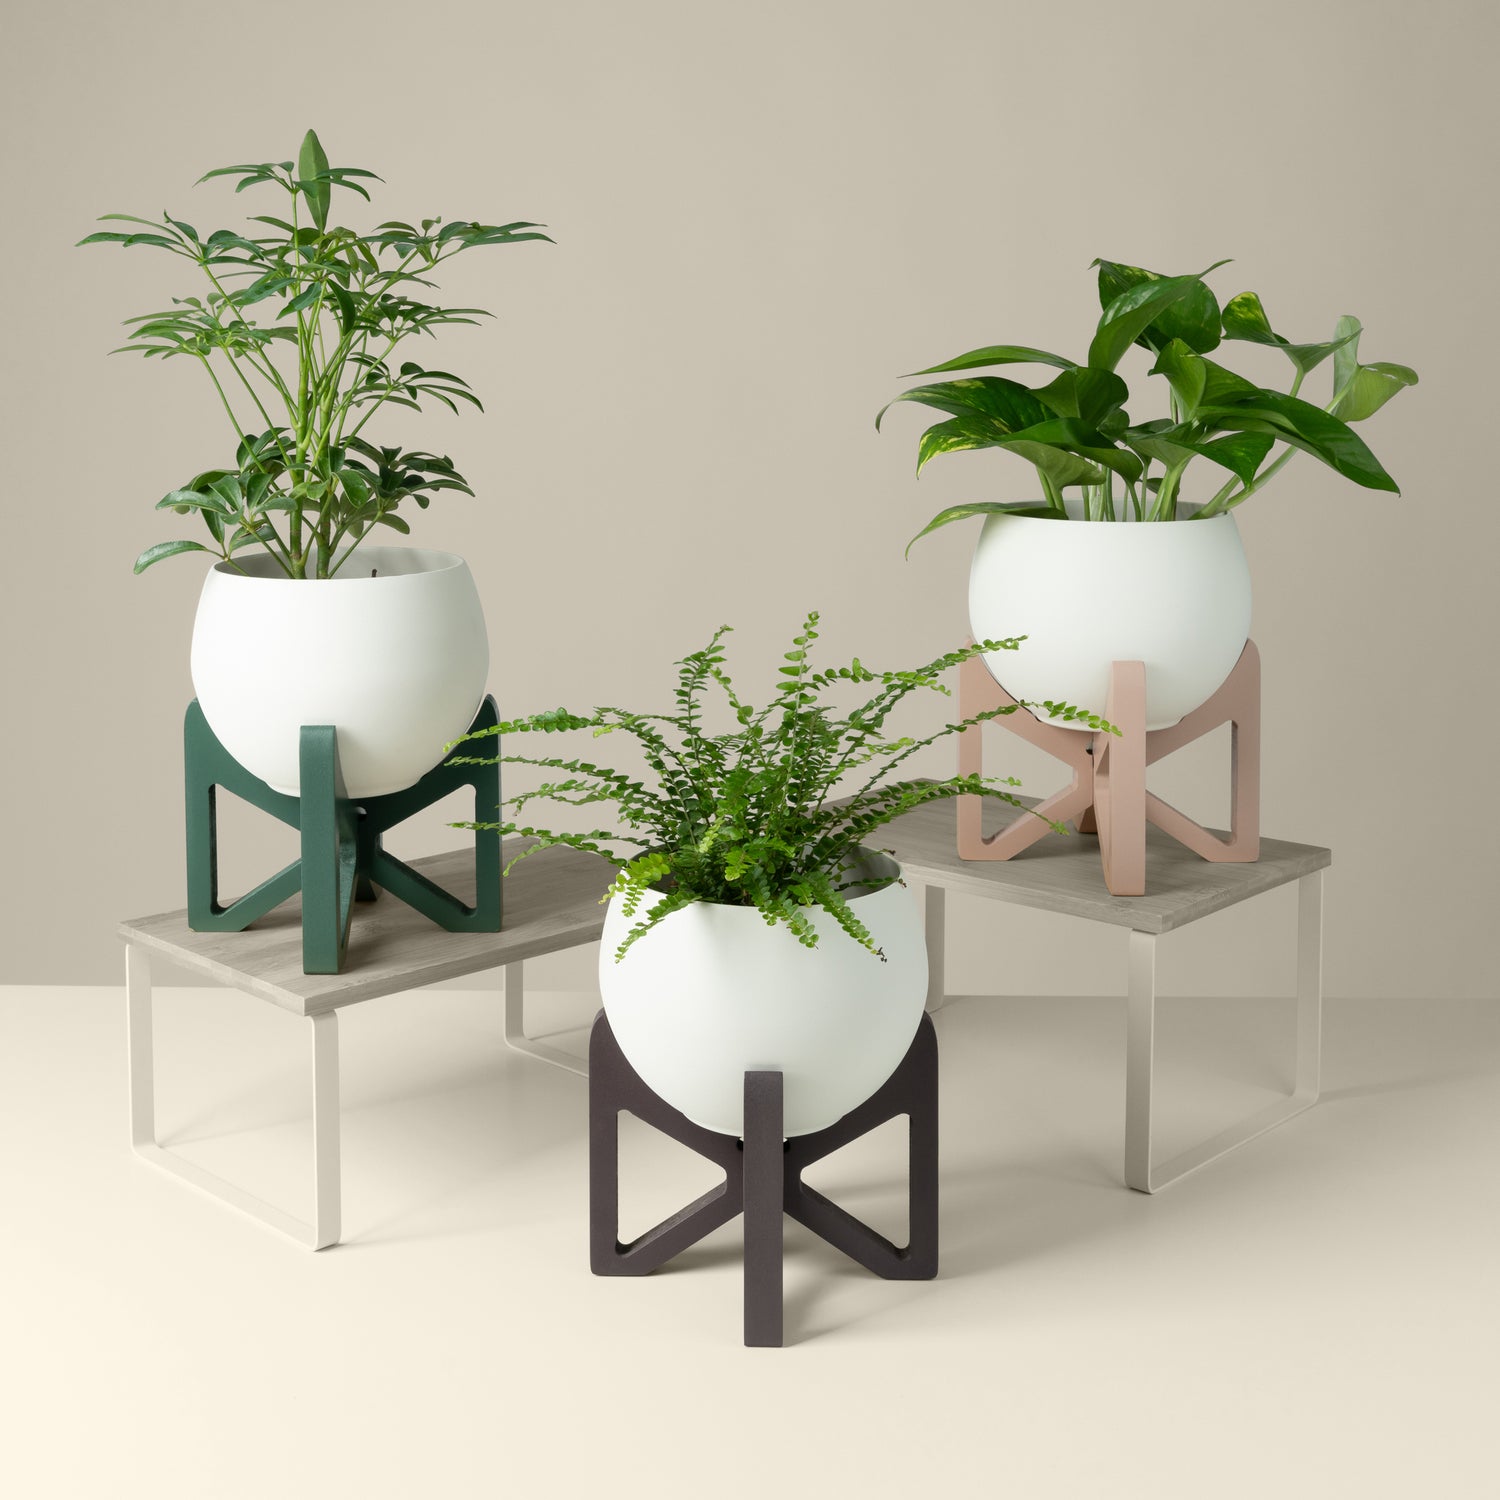 three wooden plant stands with aluminum pots for houseplants